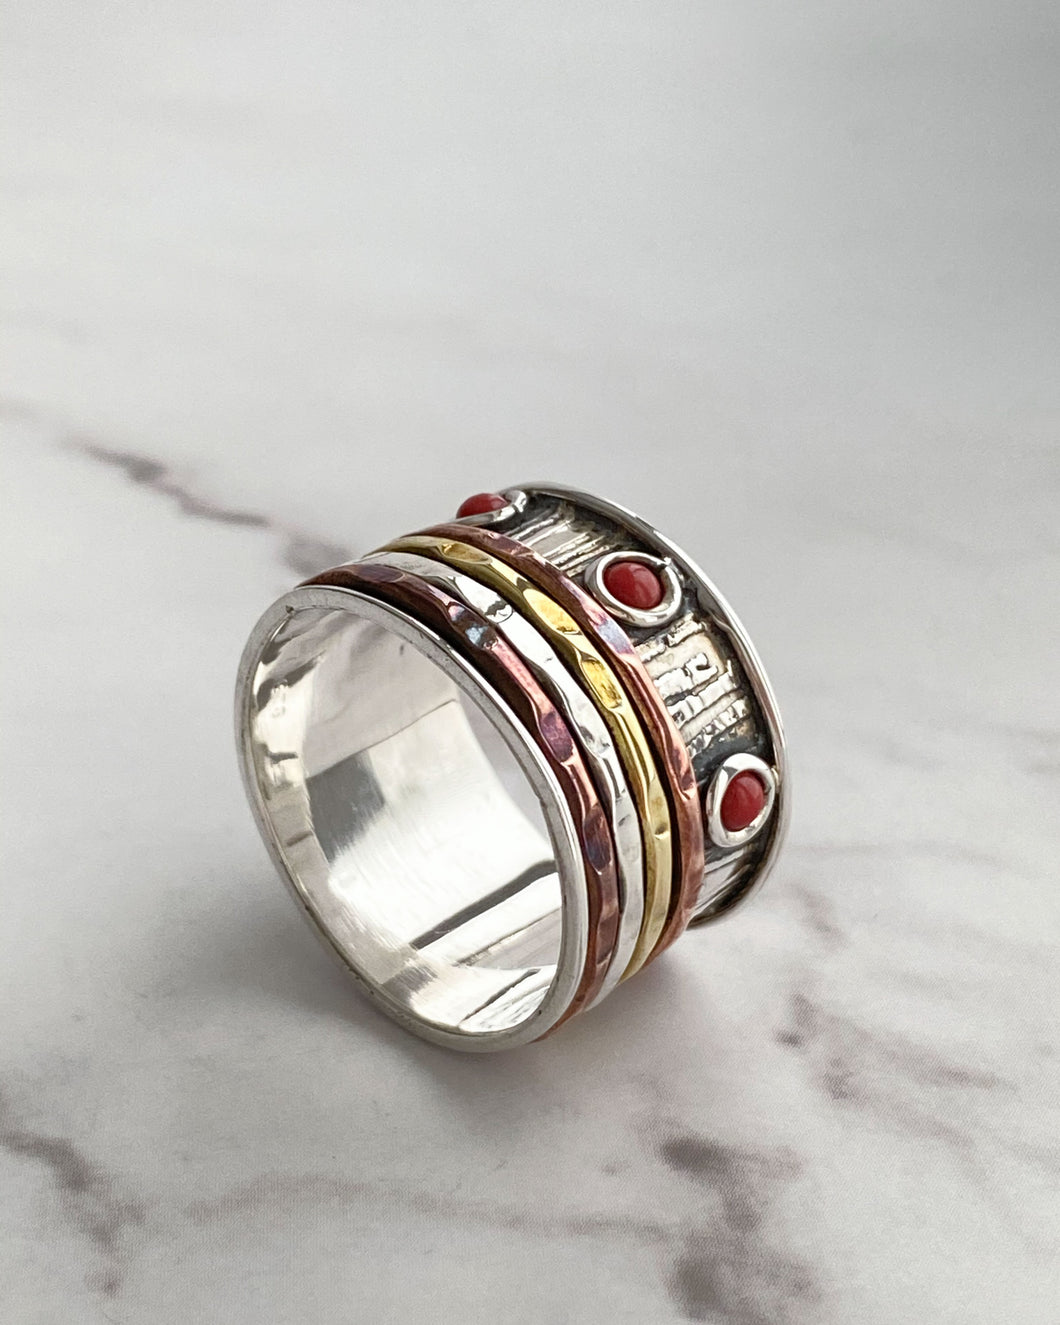 Meditation Ring with Red Stones